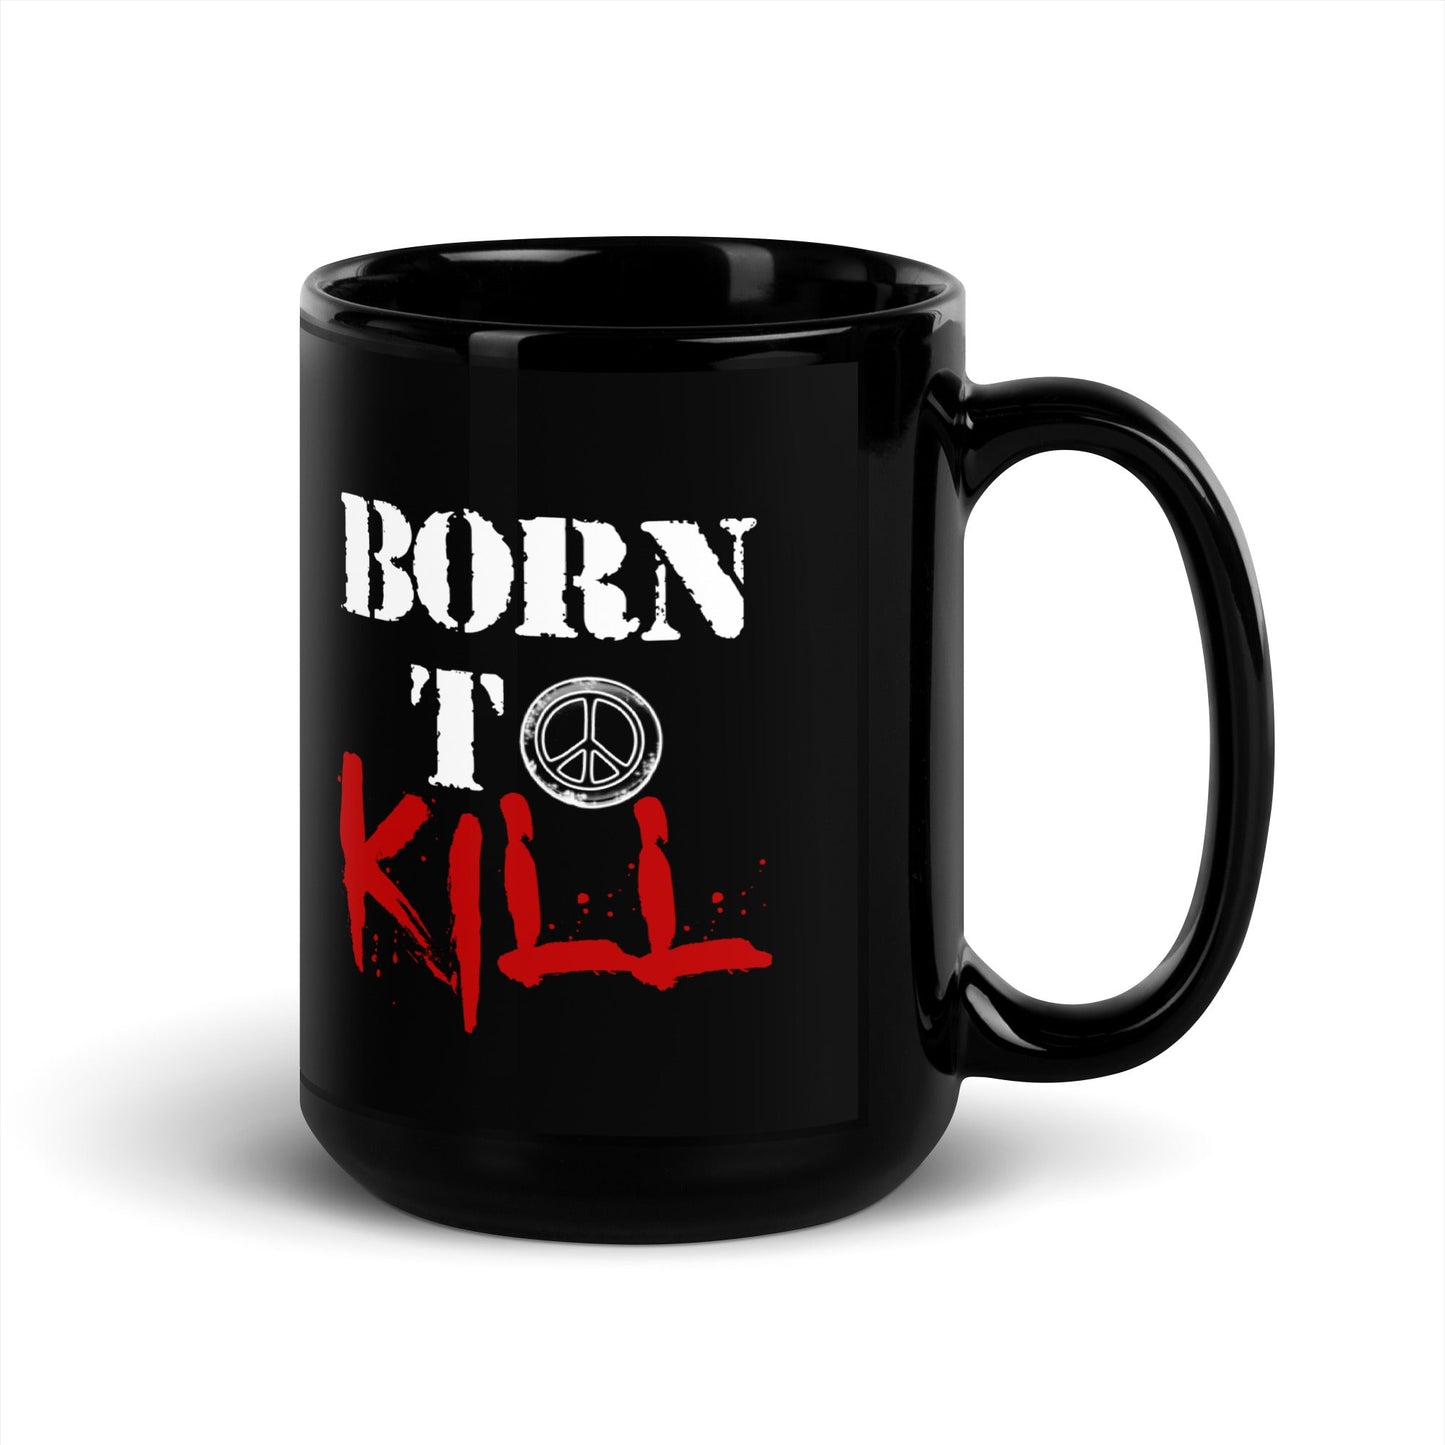 Born to Kill Full Metal Jacket Mug - A Bold Statement for Your Morning Brew - thenightmareinc